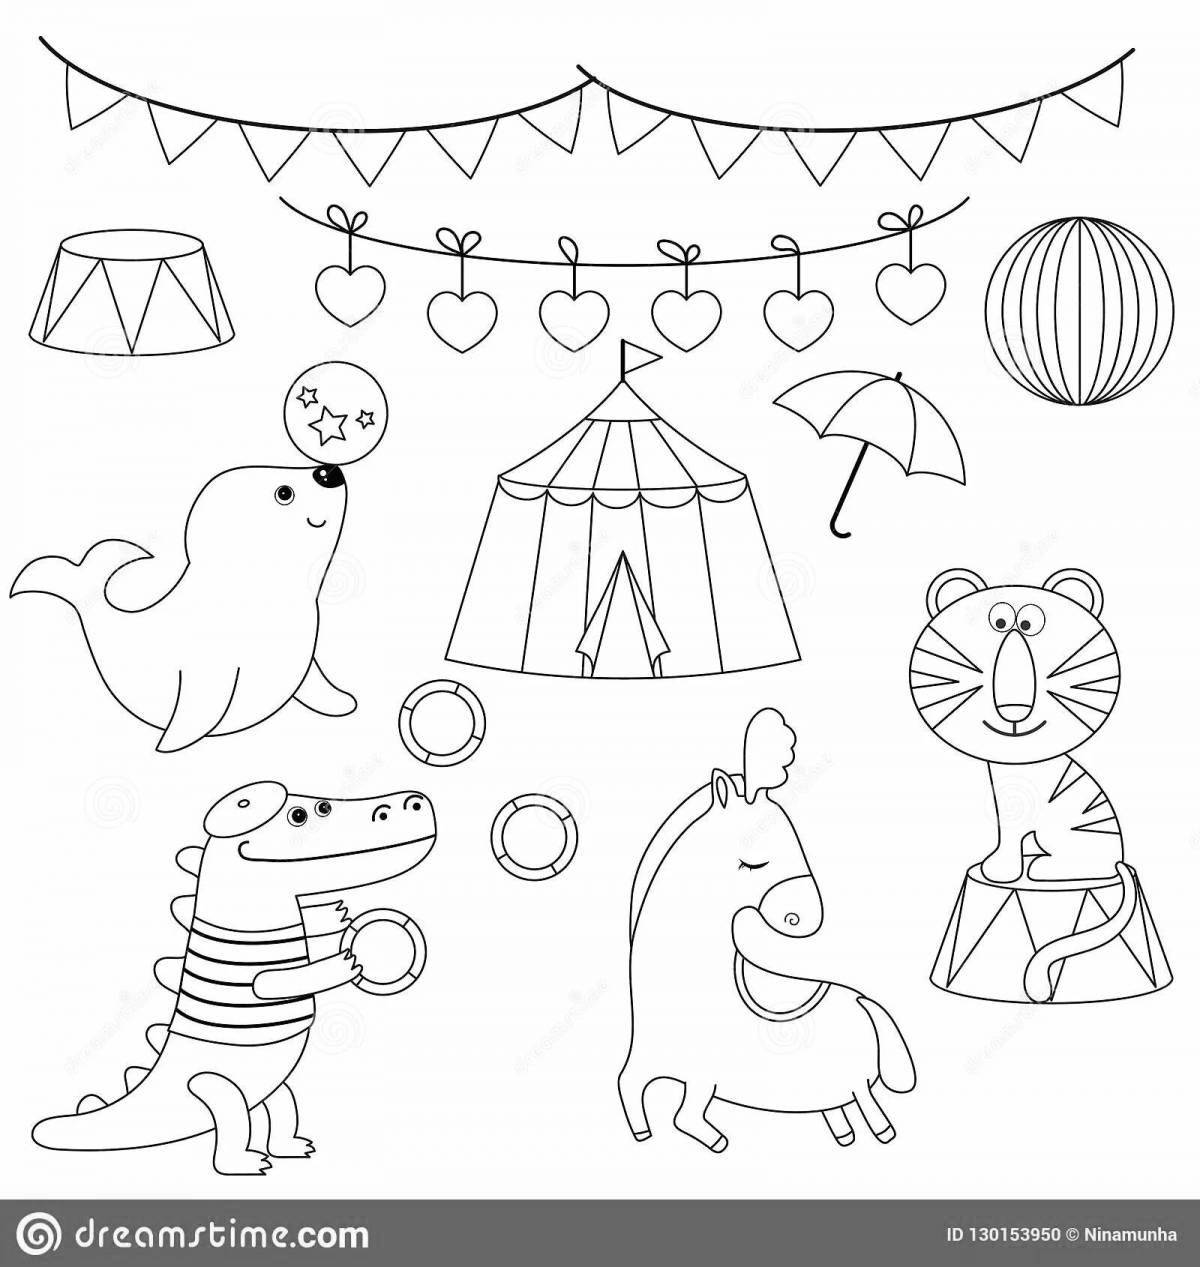 Amazing circus coloring book for kids